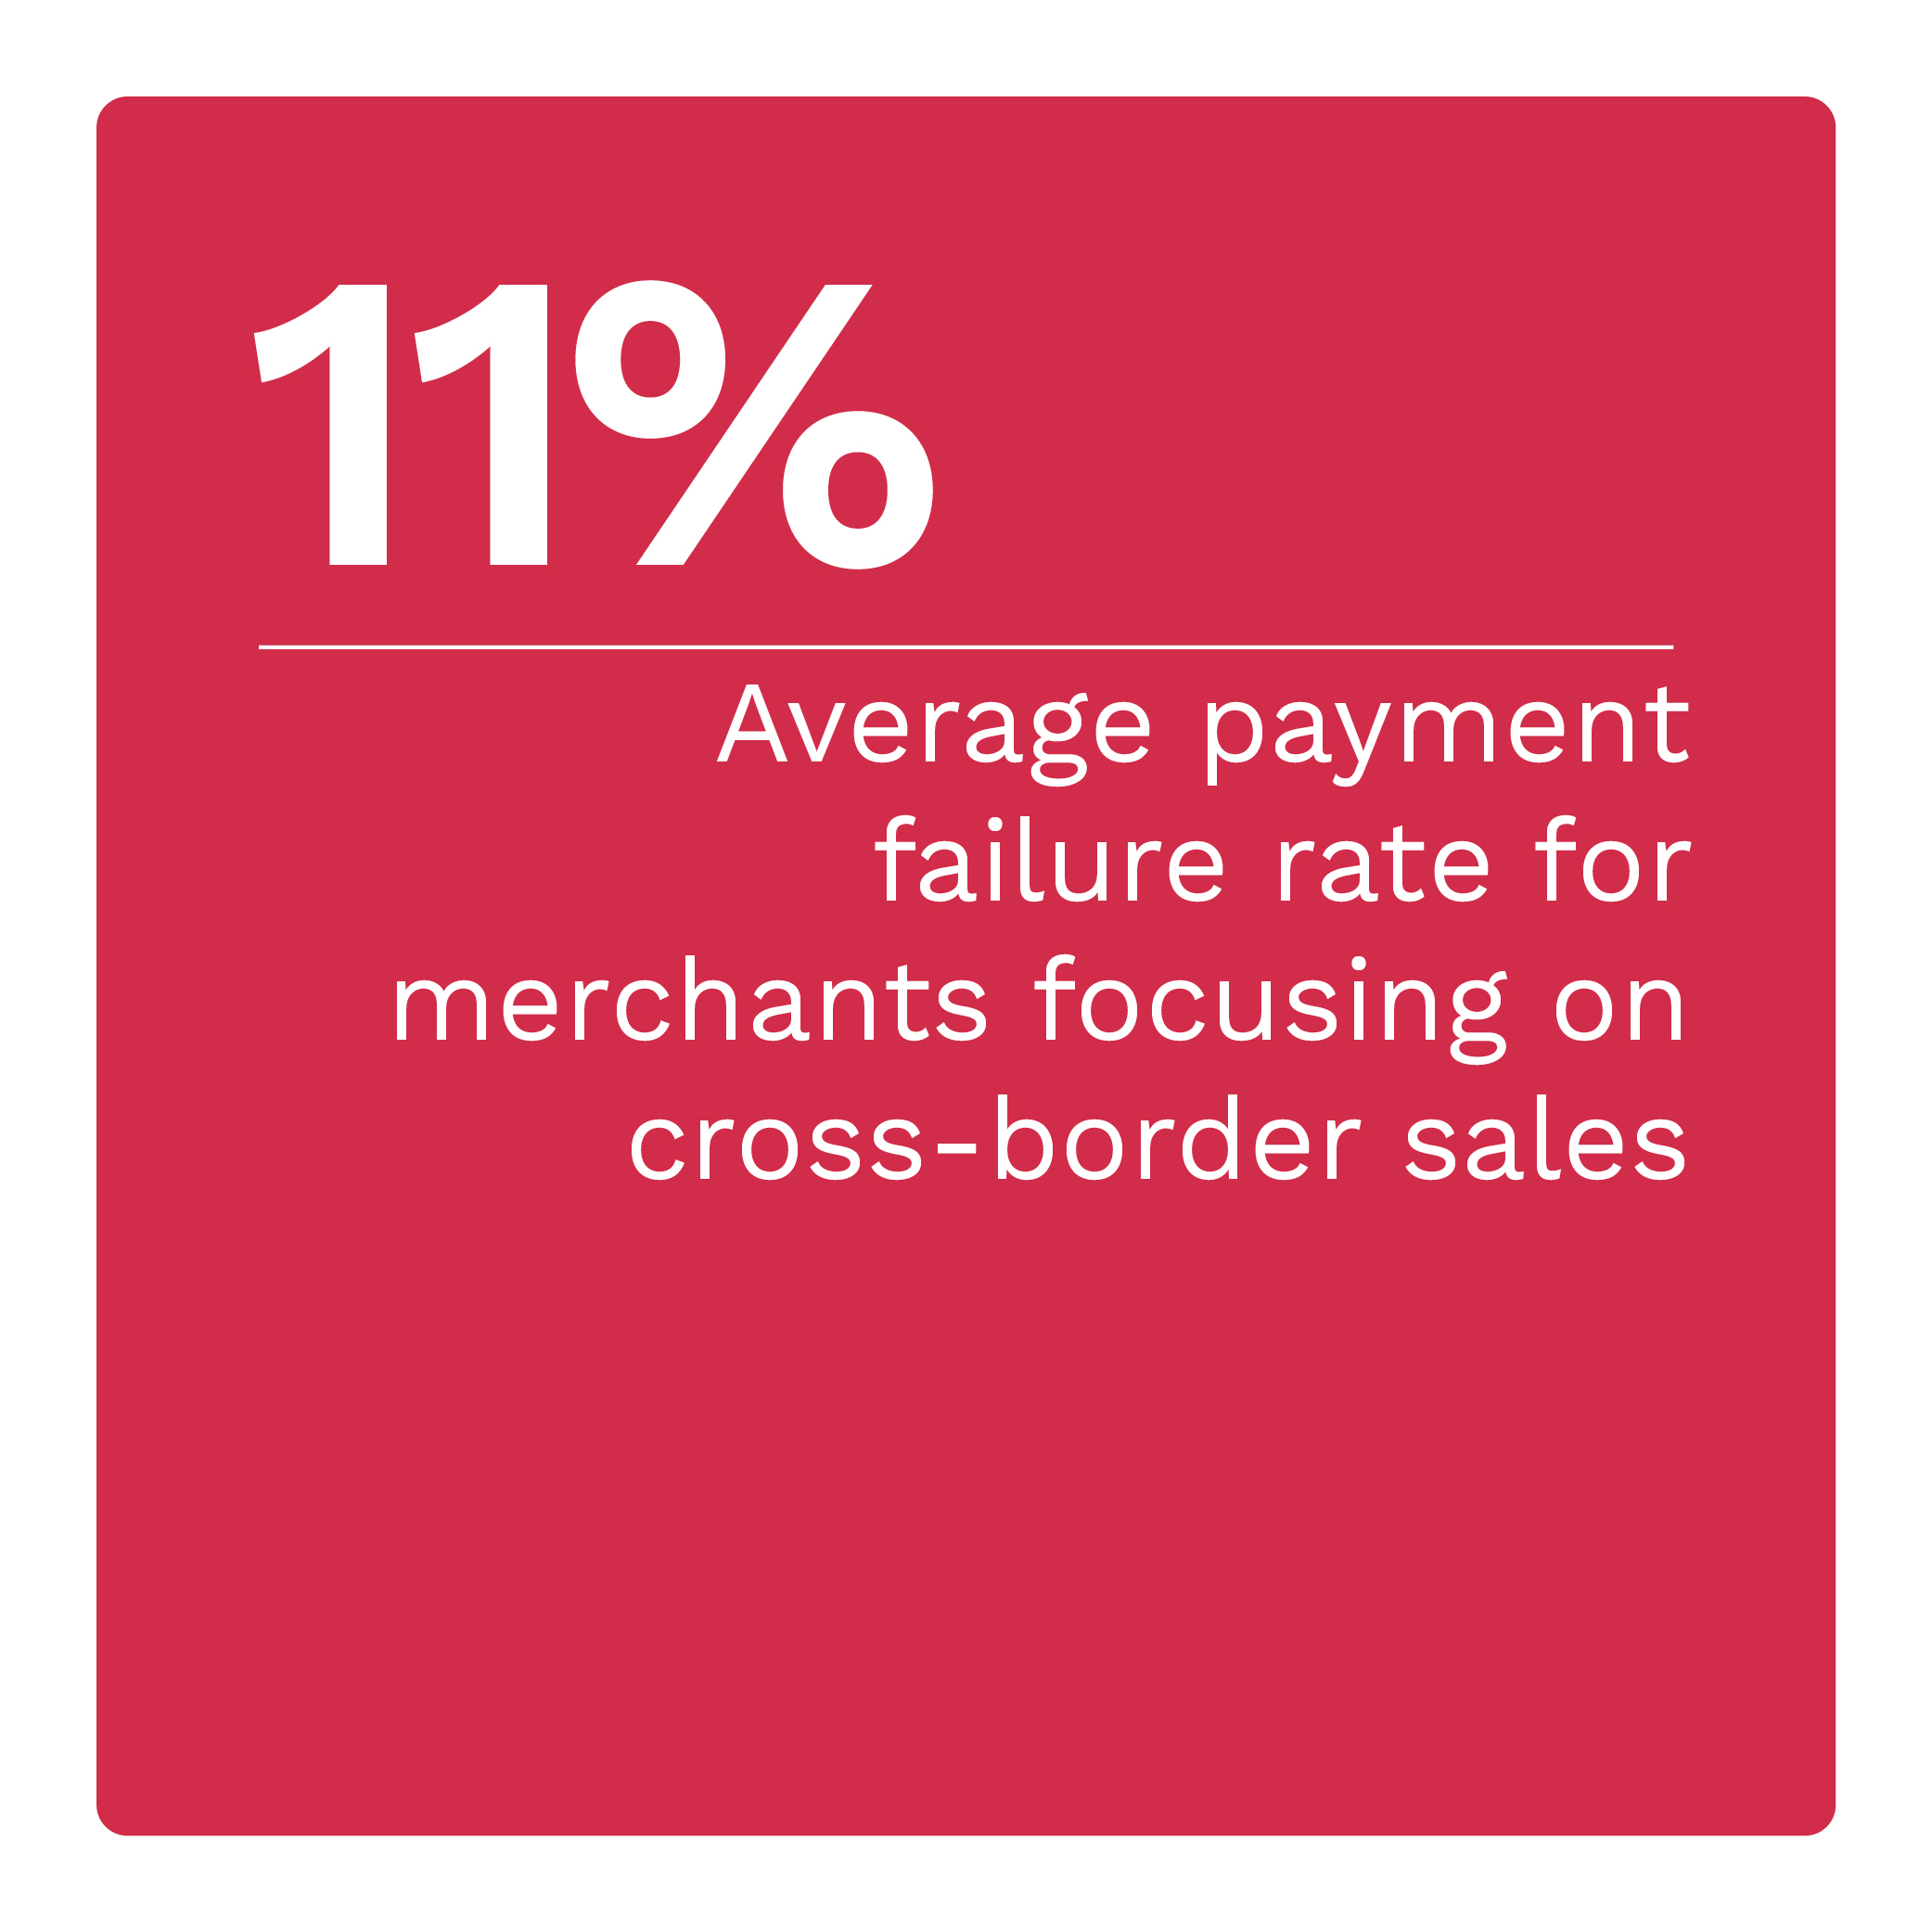 11%: Average payment failure rate for merchants focusing on cross-border sales